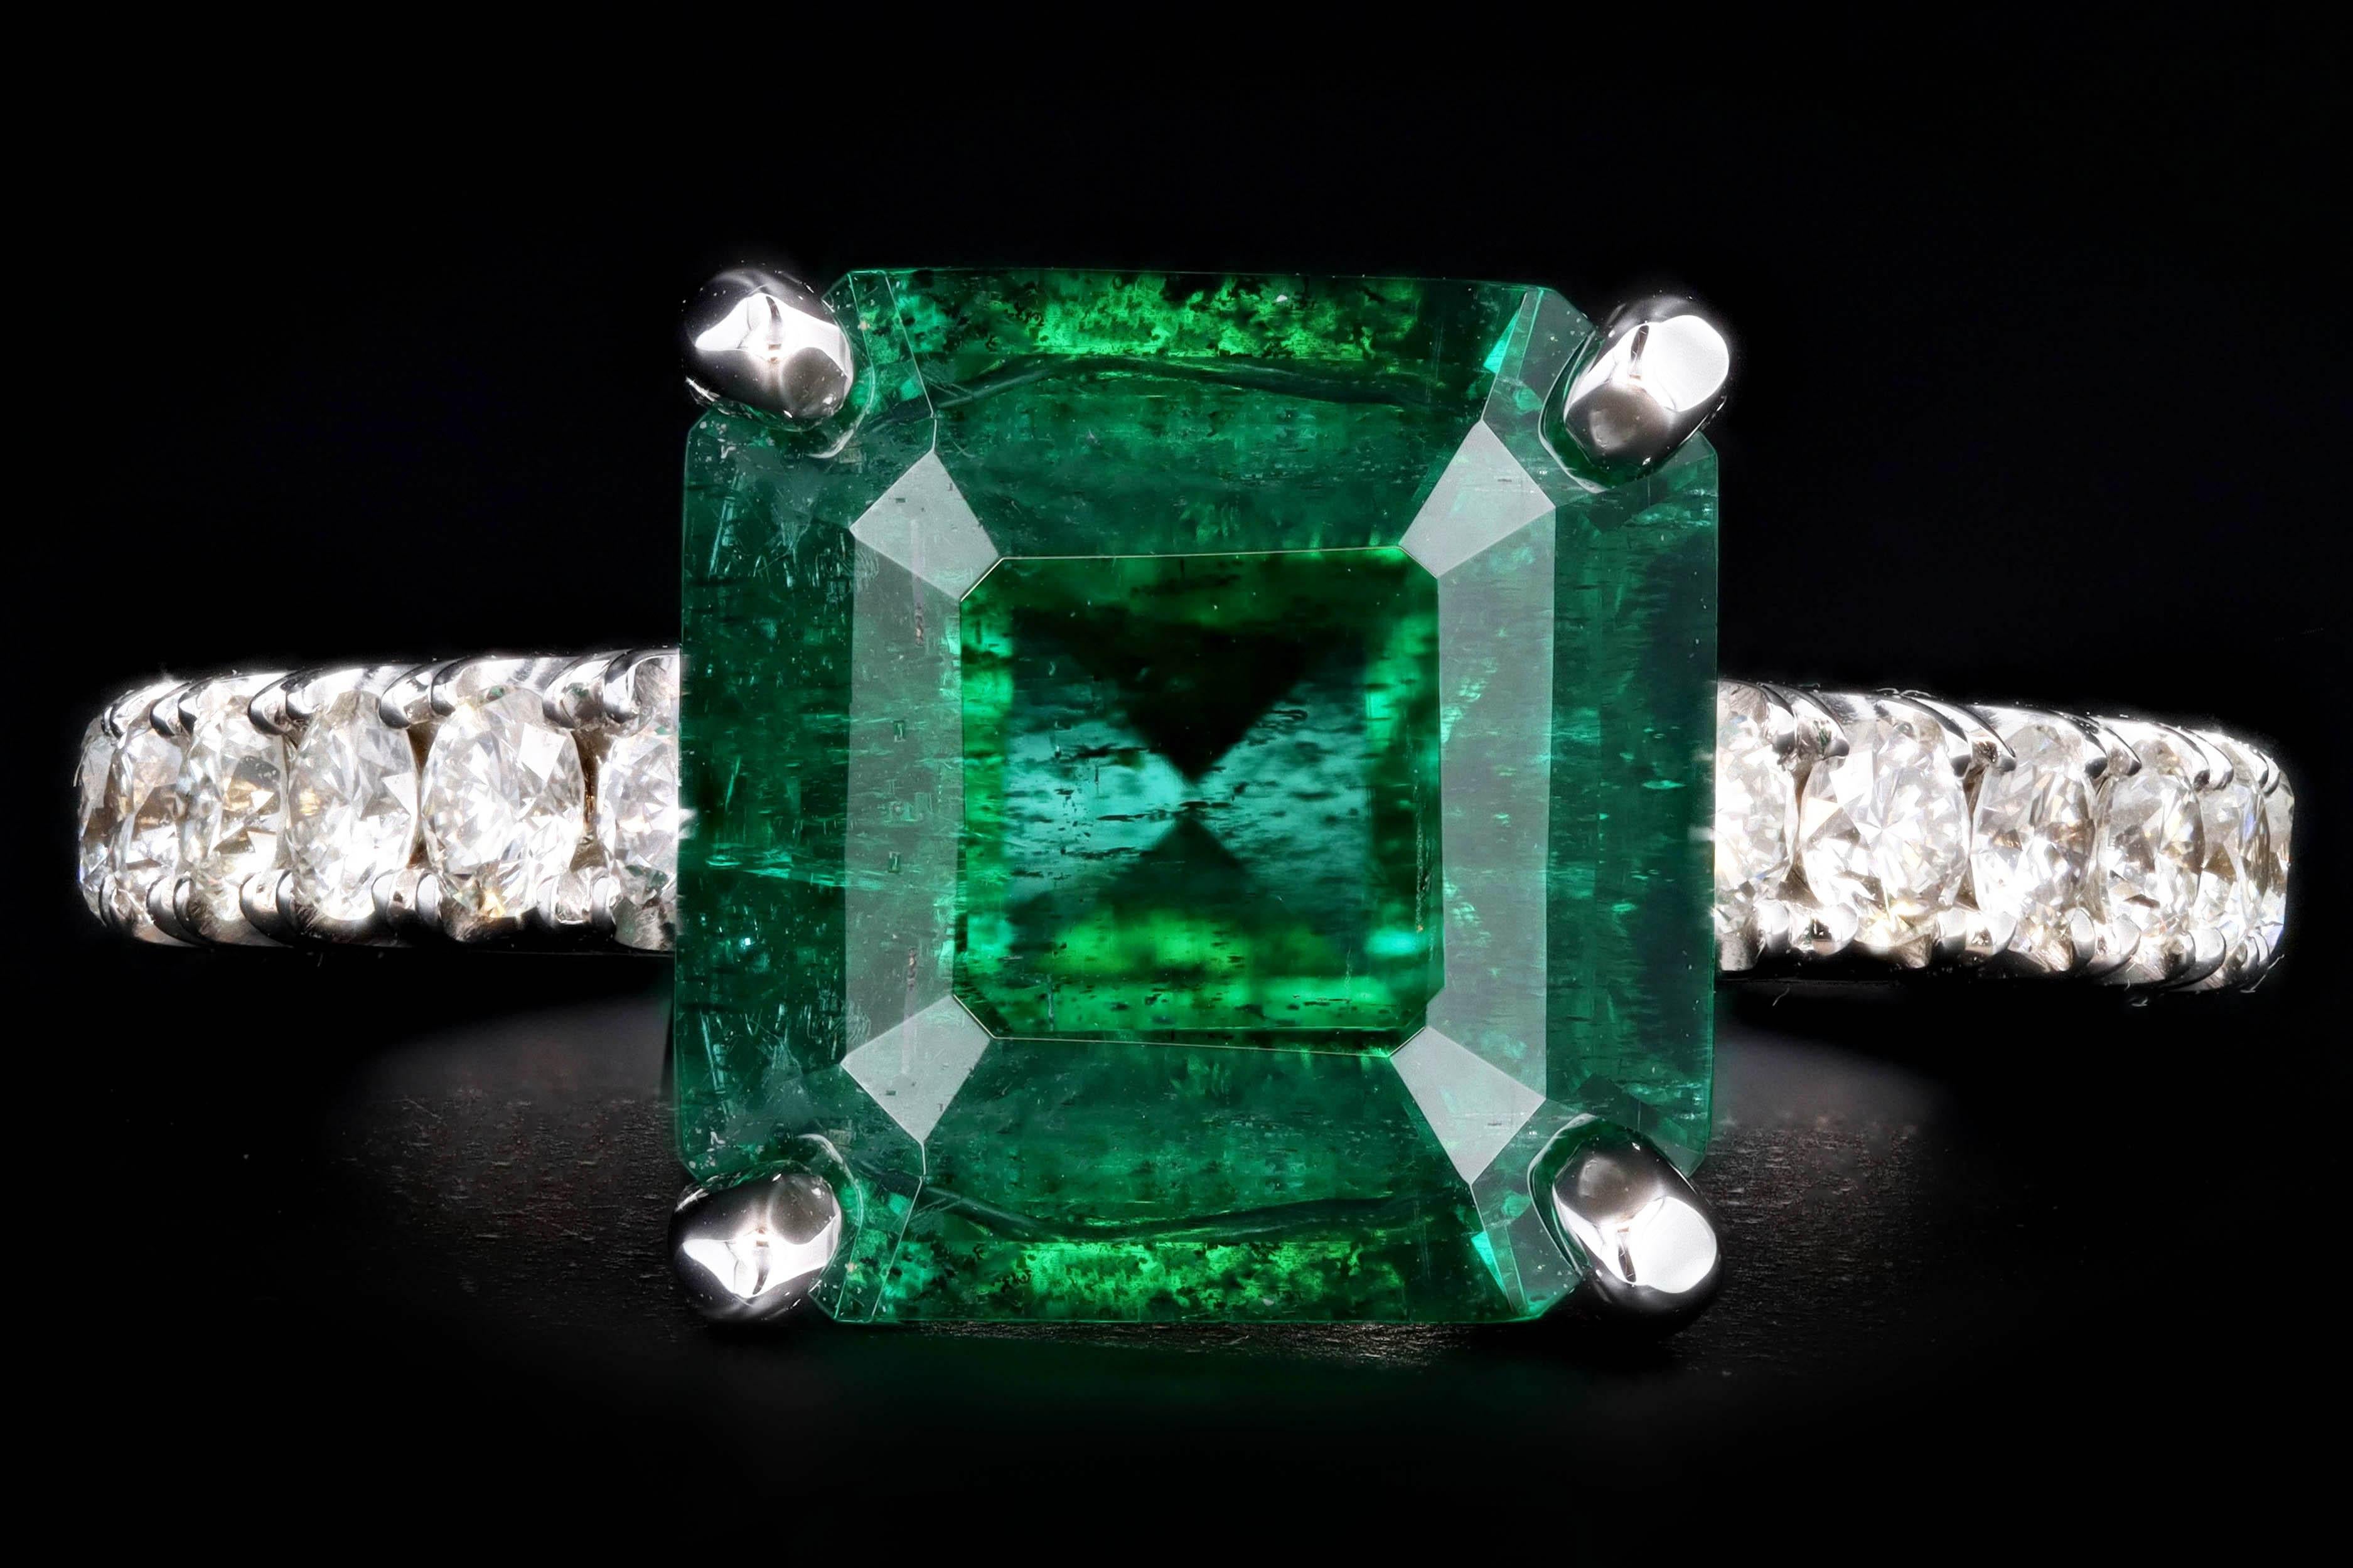 Era: Modern

Composition: 14K White Gold

Primary Stone: Natural Emerald

Origin: Zambia 

Carat Weight: 2.83 Carats

Accent Stone: Round Brilliant Diamonds 

Carat Weight: Approximately 0.65 Carats

Color/ Clarity: H/I - VS2/SI1

Ring Size: